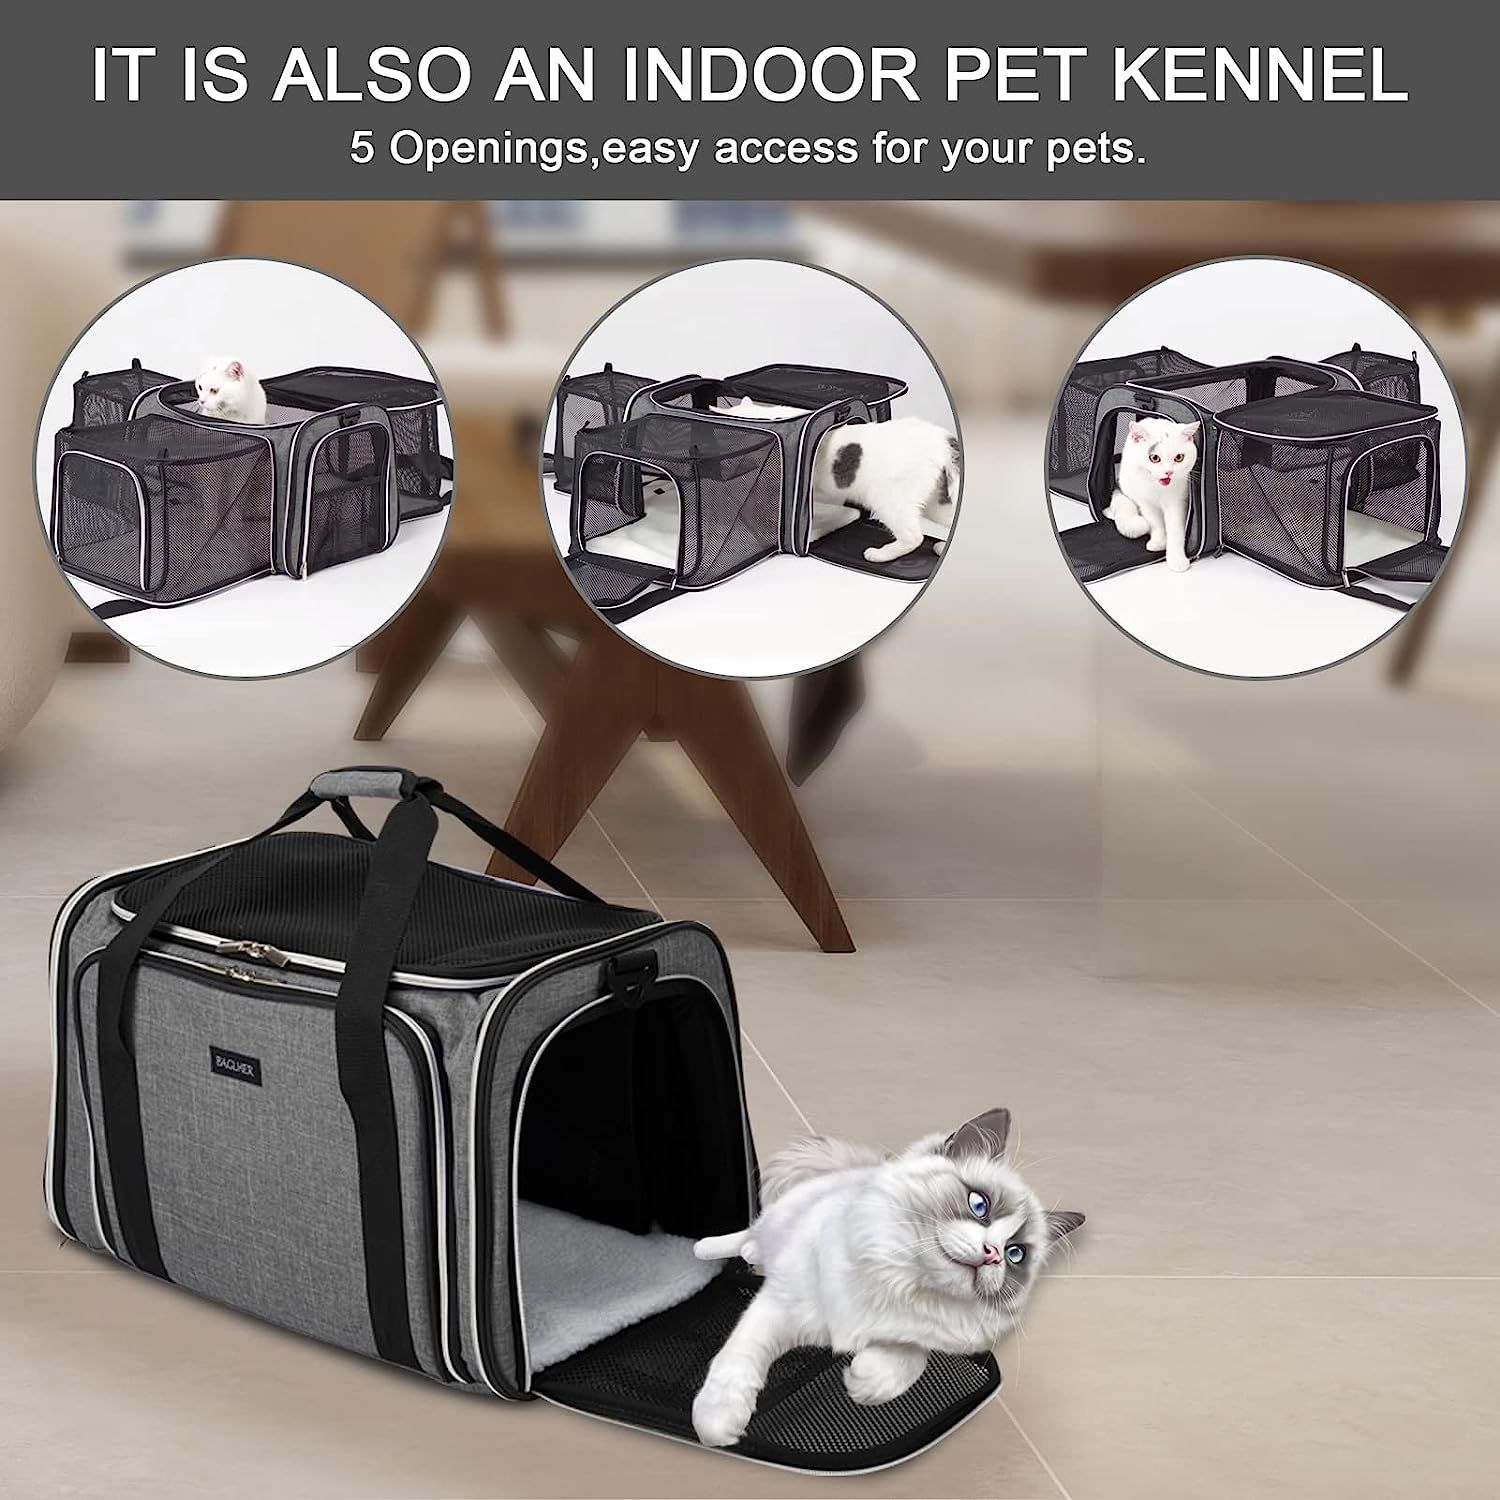 BAGLHER Pet Travel Carrier, Airline Approved Cat Carriers, Dog  Carrier,Suitable for Small and Medium-Sized Cats and Dogs Pet Soft Carrier,  Suitable